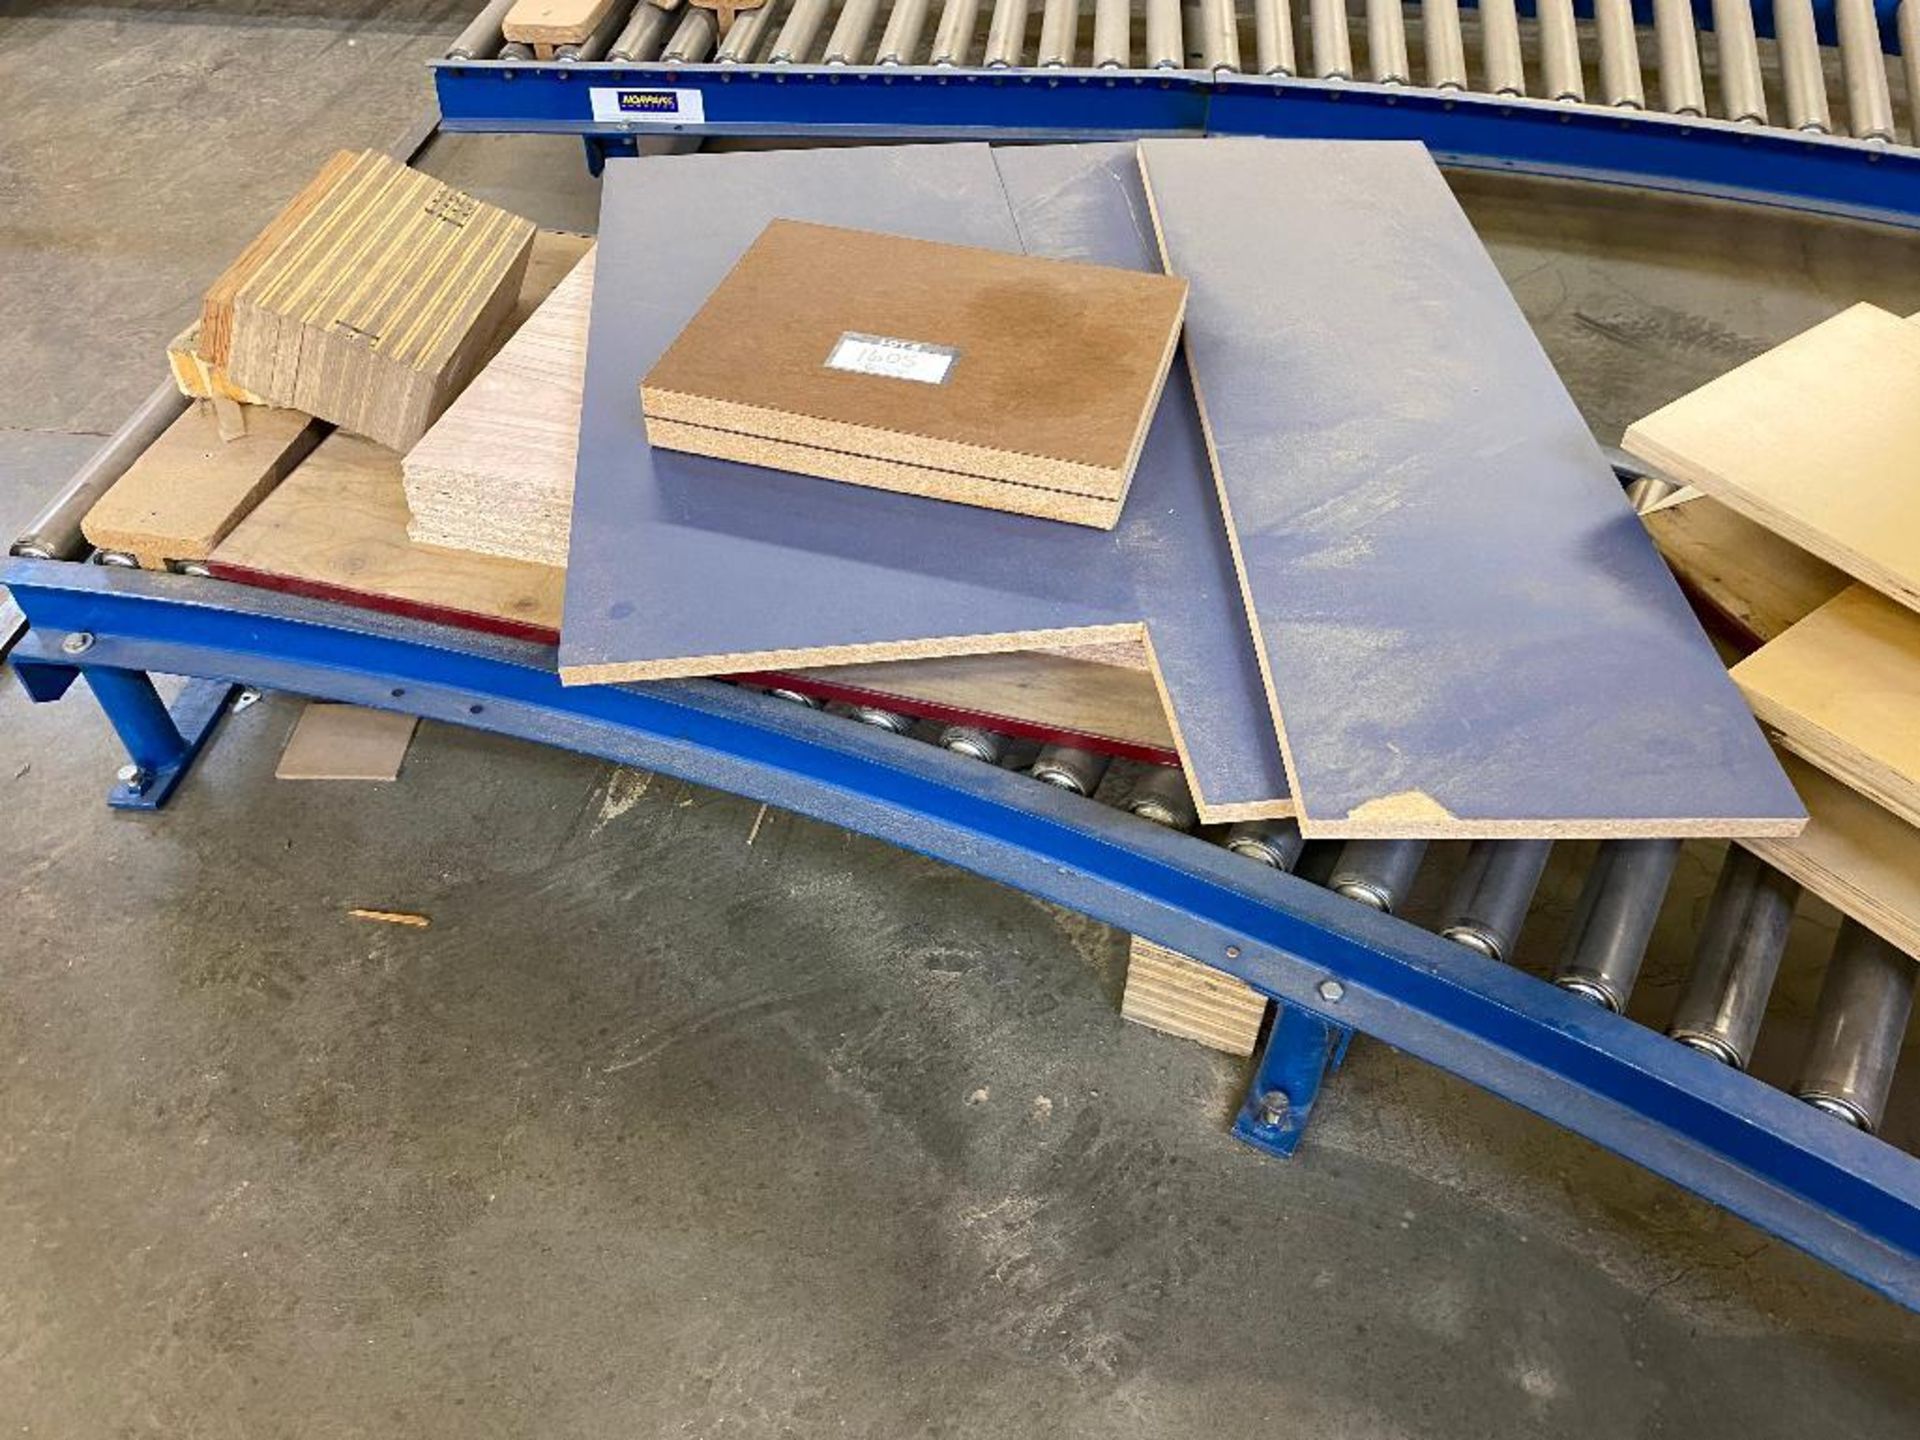 Contents of Conveyor Line including Asst. Plywood and Particle Board, etc. - Image 5 of 6